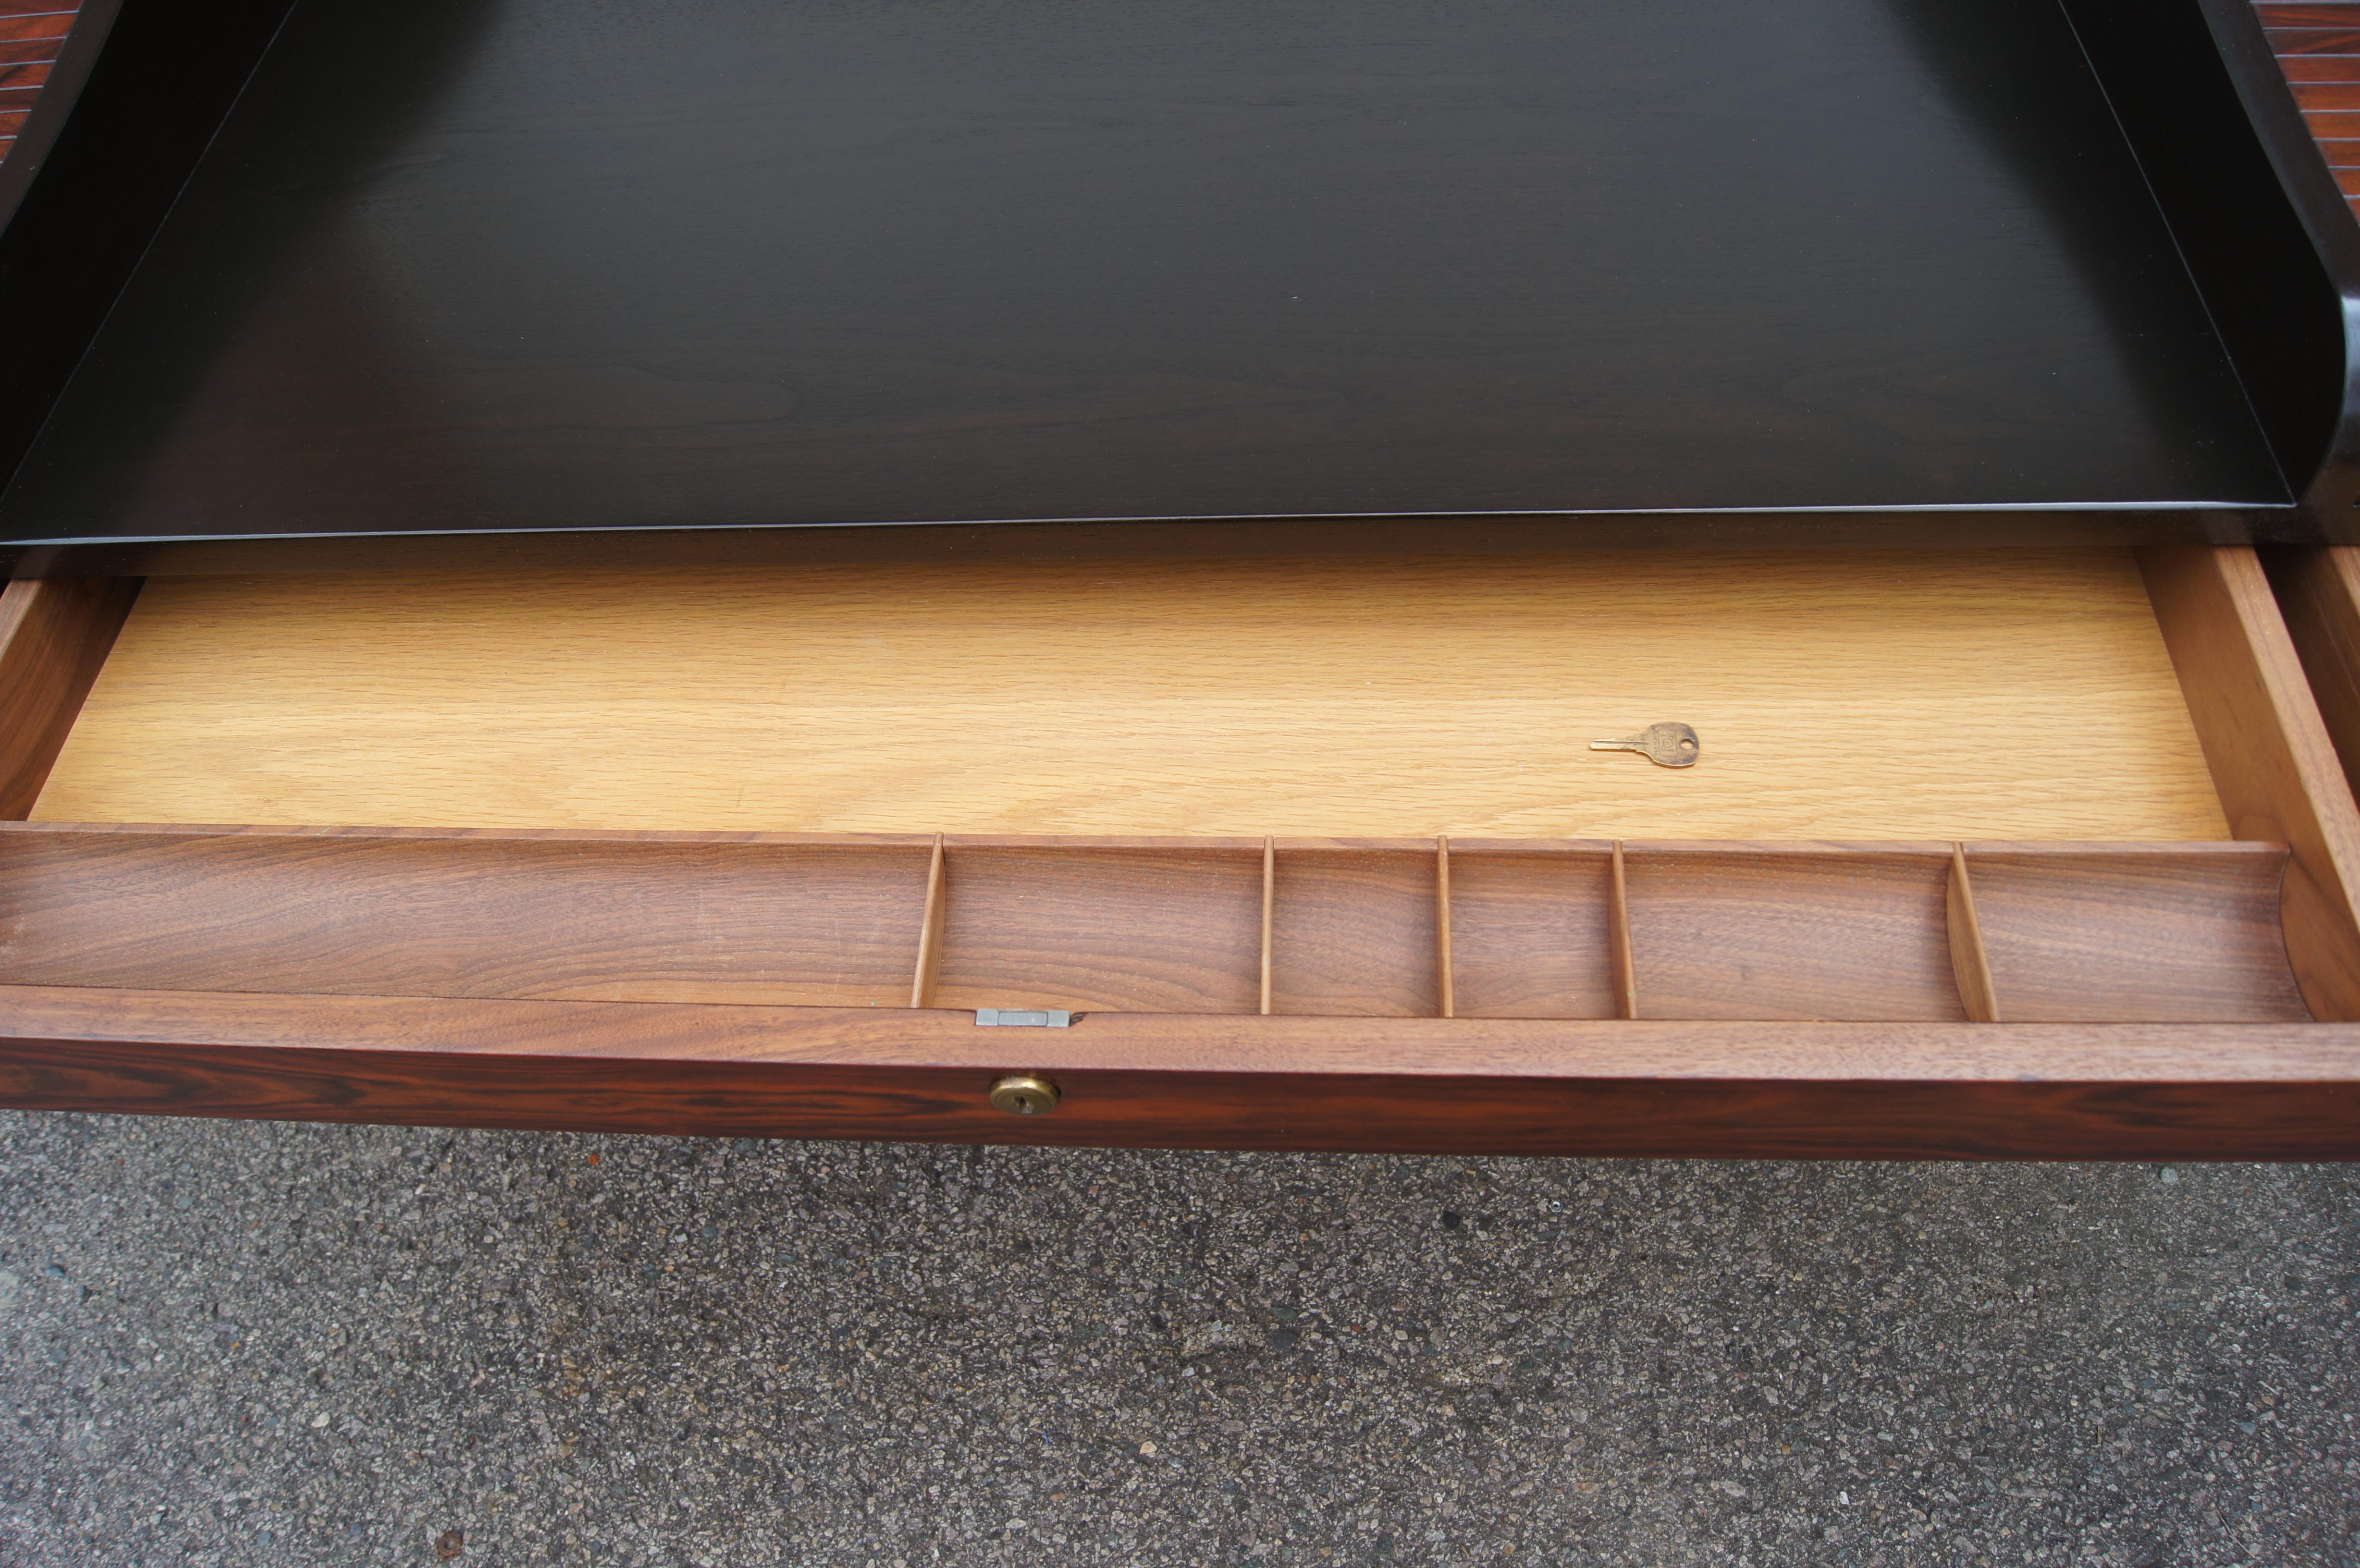 Rosewood and Mahogany Roll-Top Desk by Edward Wormley for Dunbar In Good Condition For Sale In Dorchester, MA